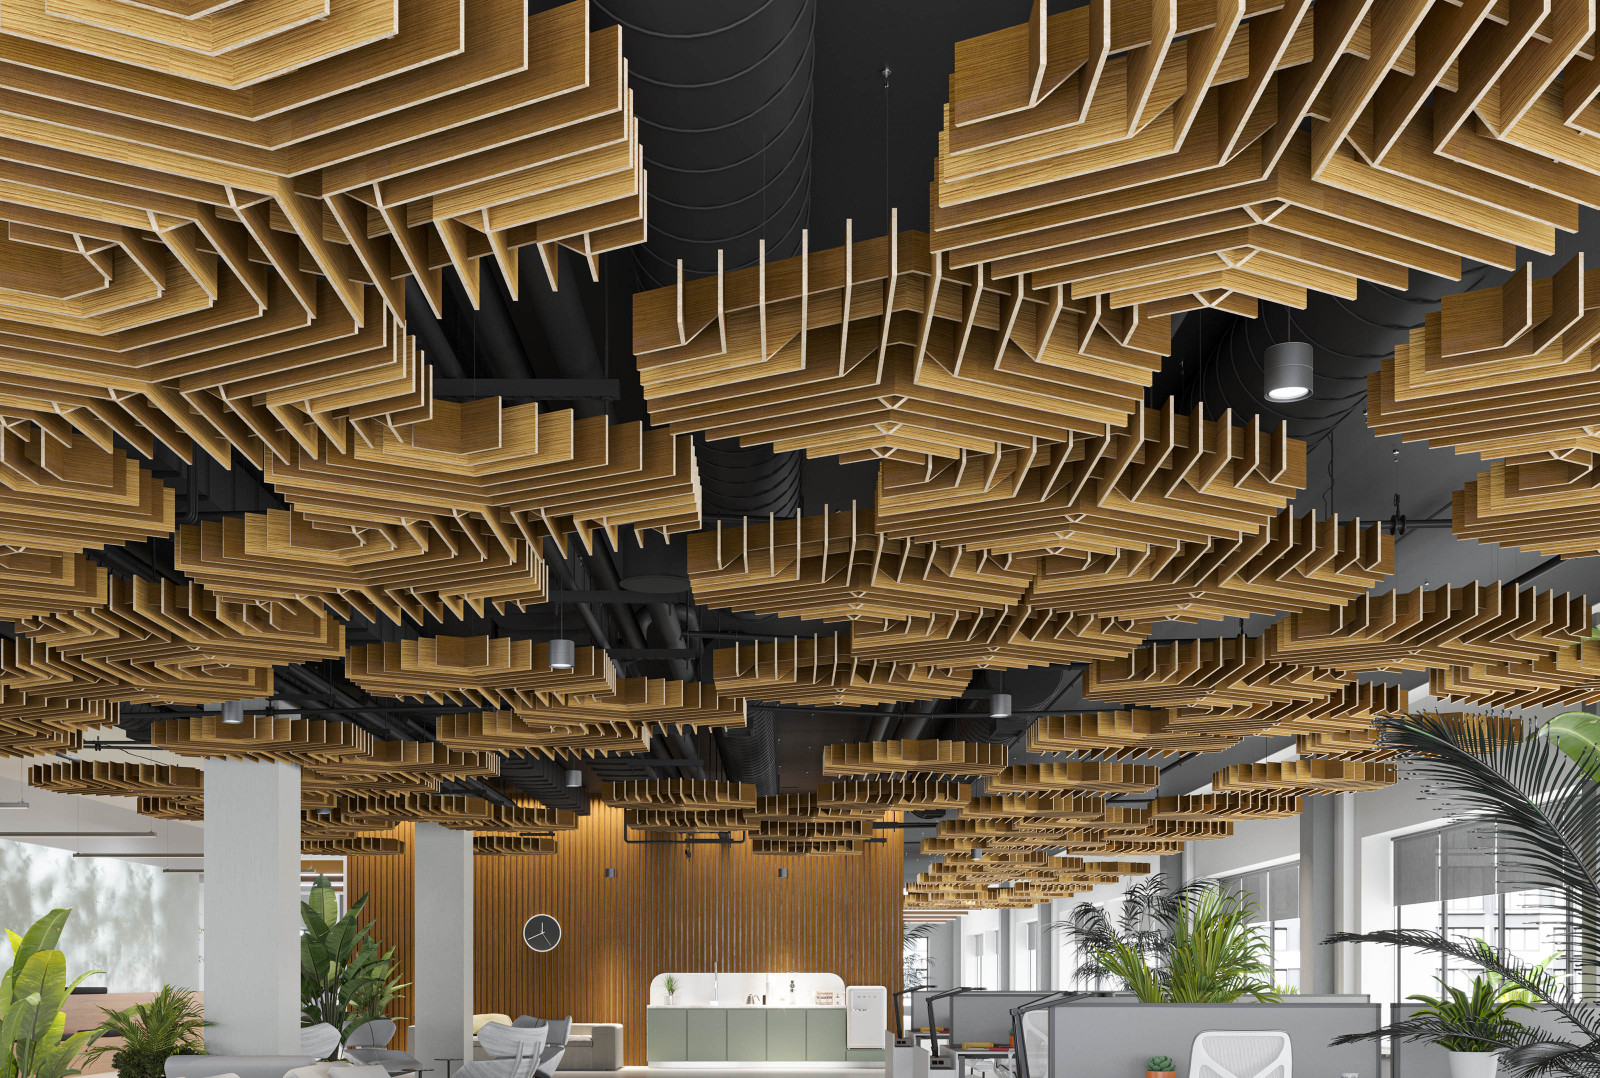 Baffle open ceiling: acoustic baffle 100% Recyclable - CEIR